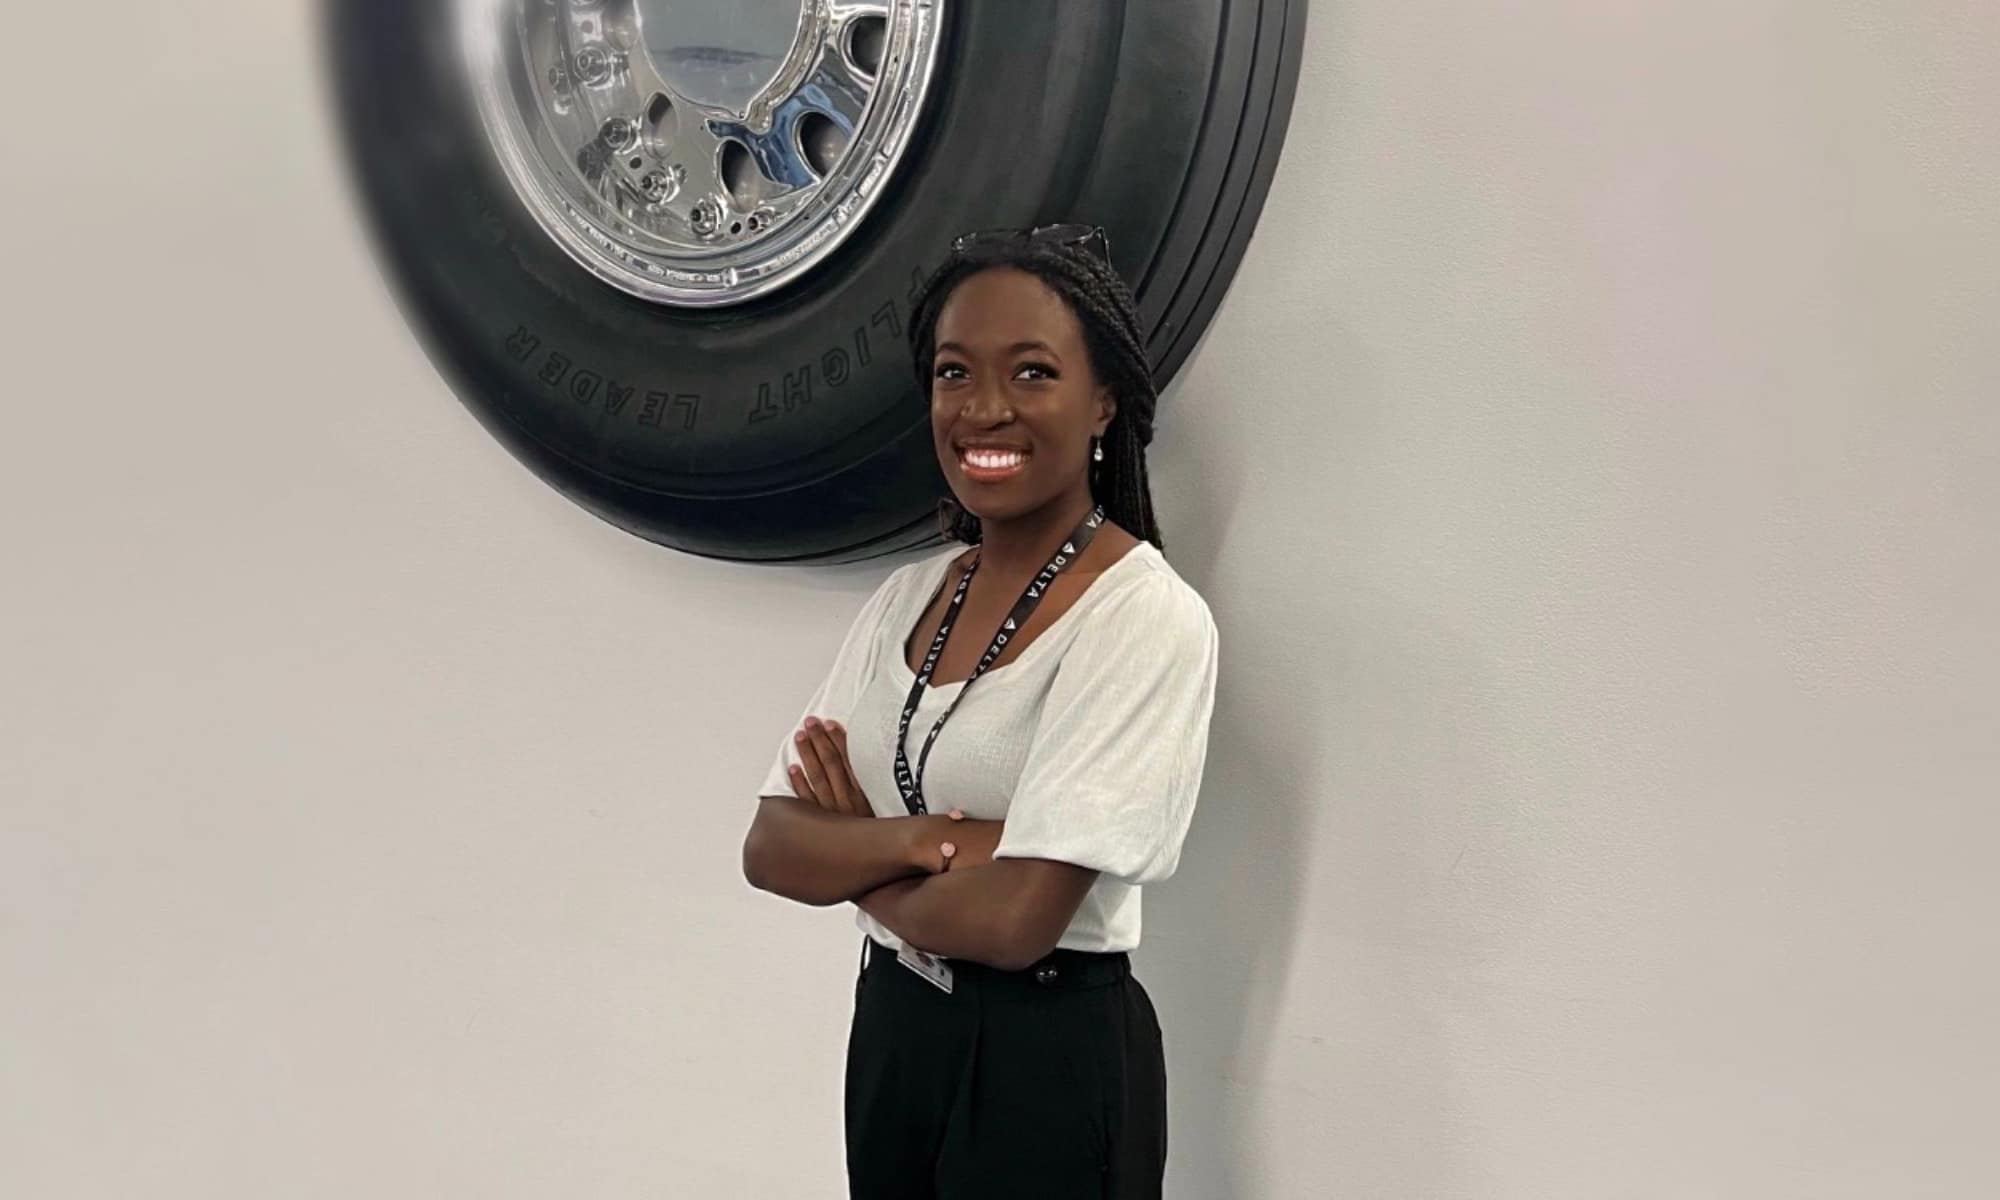 Faith, wearing a white blouse and a lanyard, poses in front of an illustration of a tire.